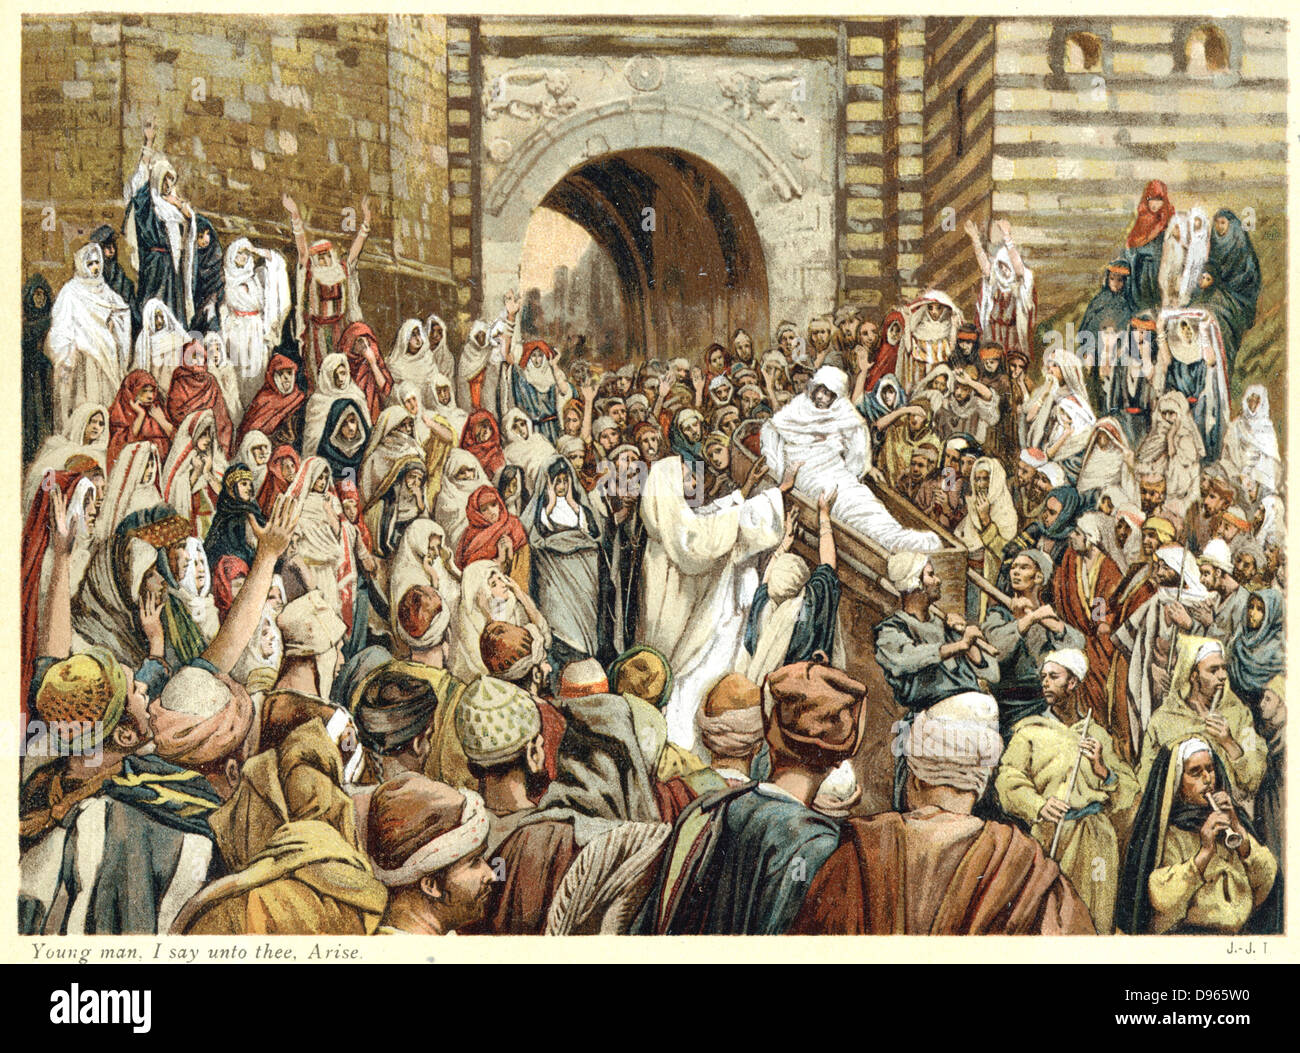 Jesus raising the widow's son at Nain. 'Young Man, I say unto thee, Arise.'  Bible, New Testament, St Luke Ch. 7. Name of young man said to be Quadratus.  From J.J. Tissot ''The Life ouf our Saviour Jesus Christ' c1890. Oleograph. Stock Photo